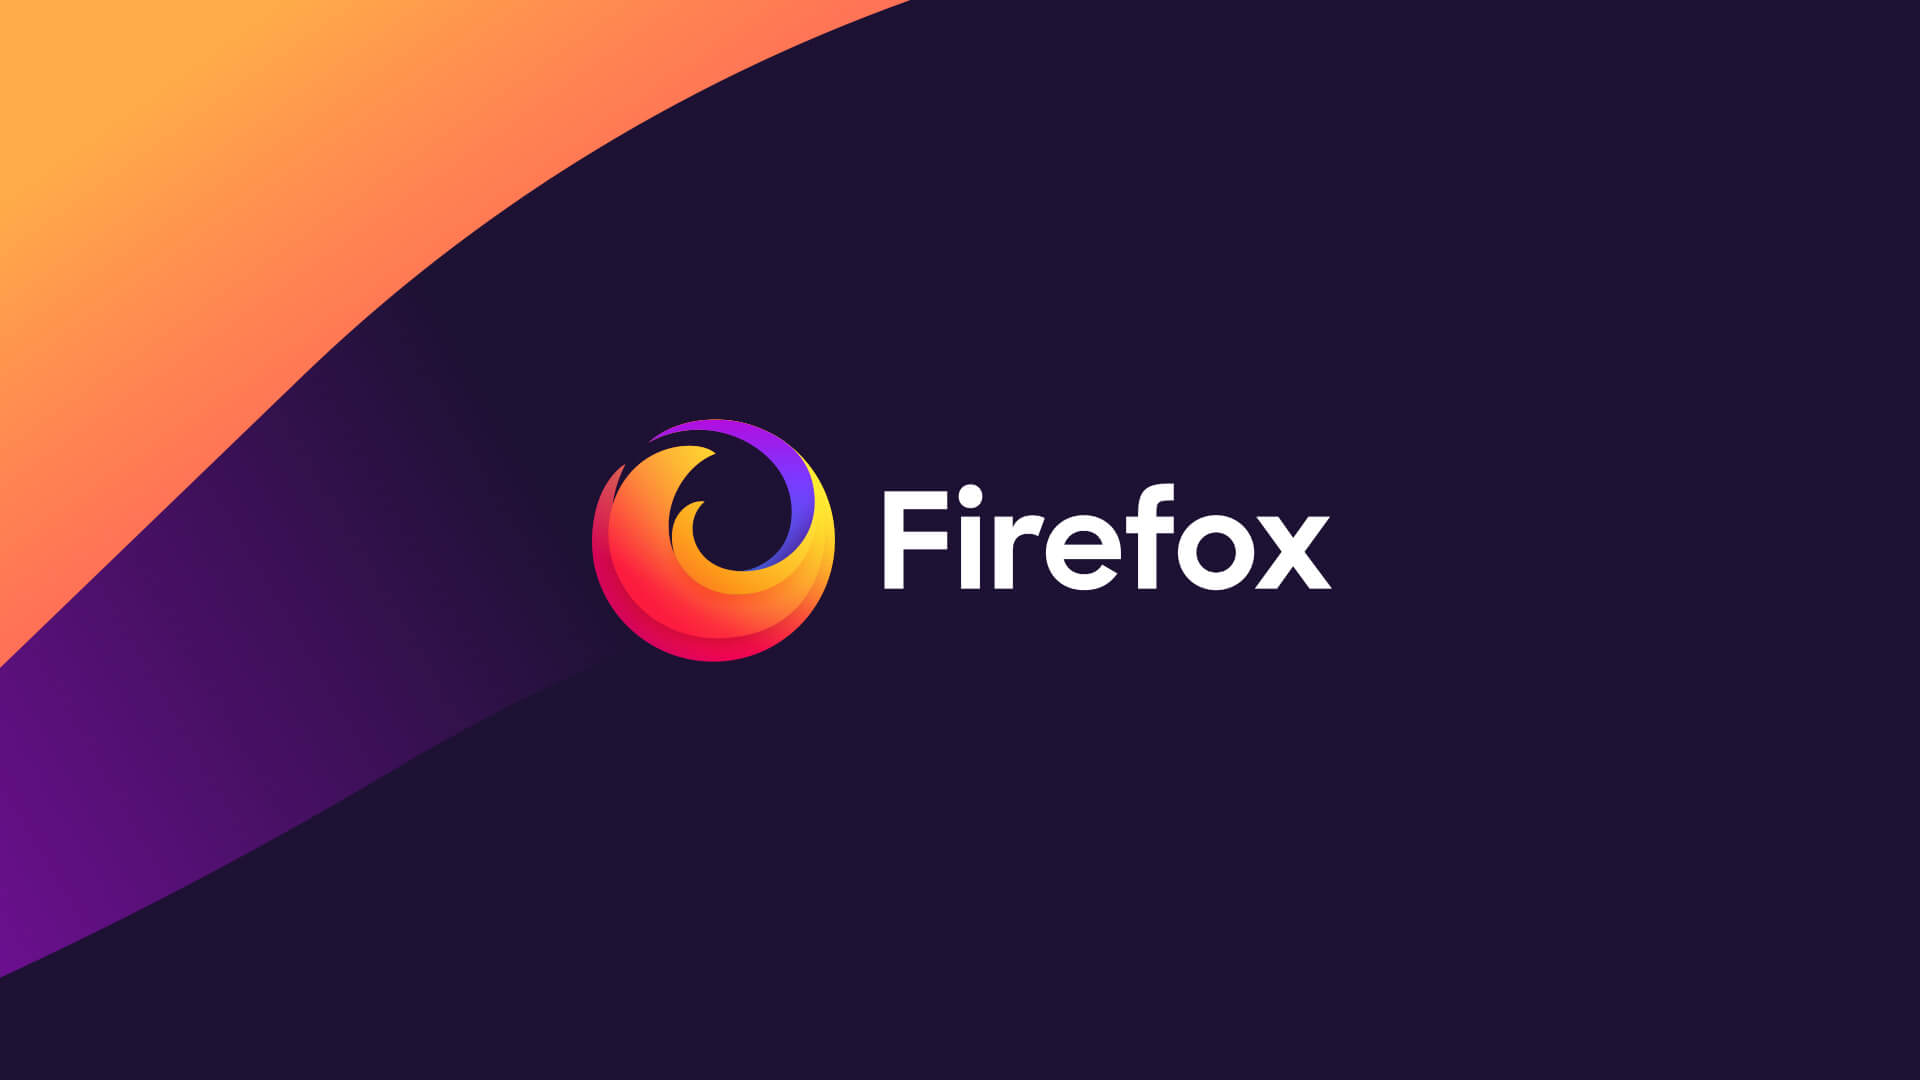 How Can I Tell Which Version Of Firefox I Have